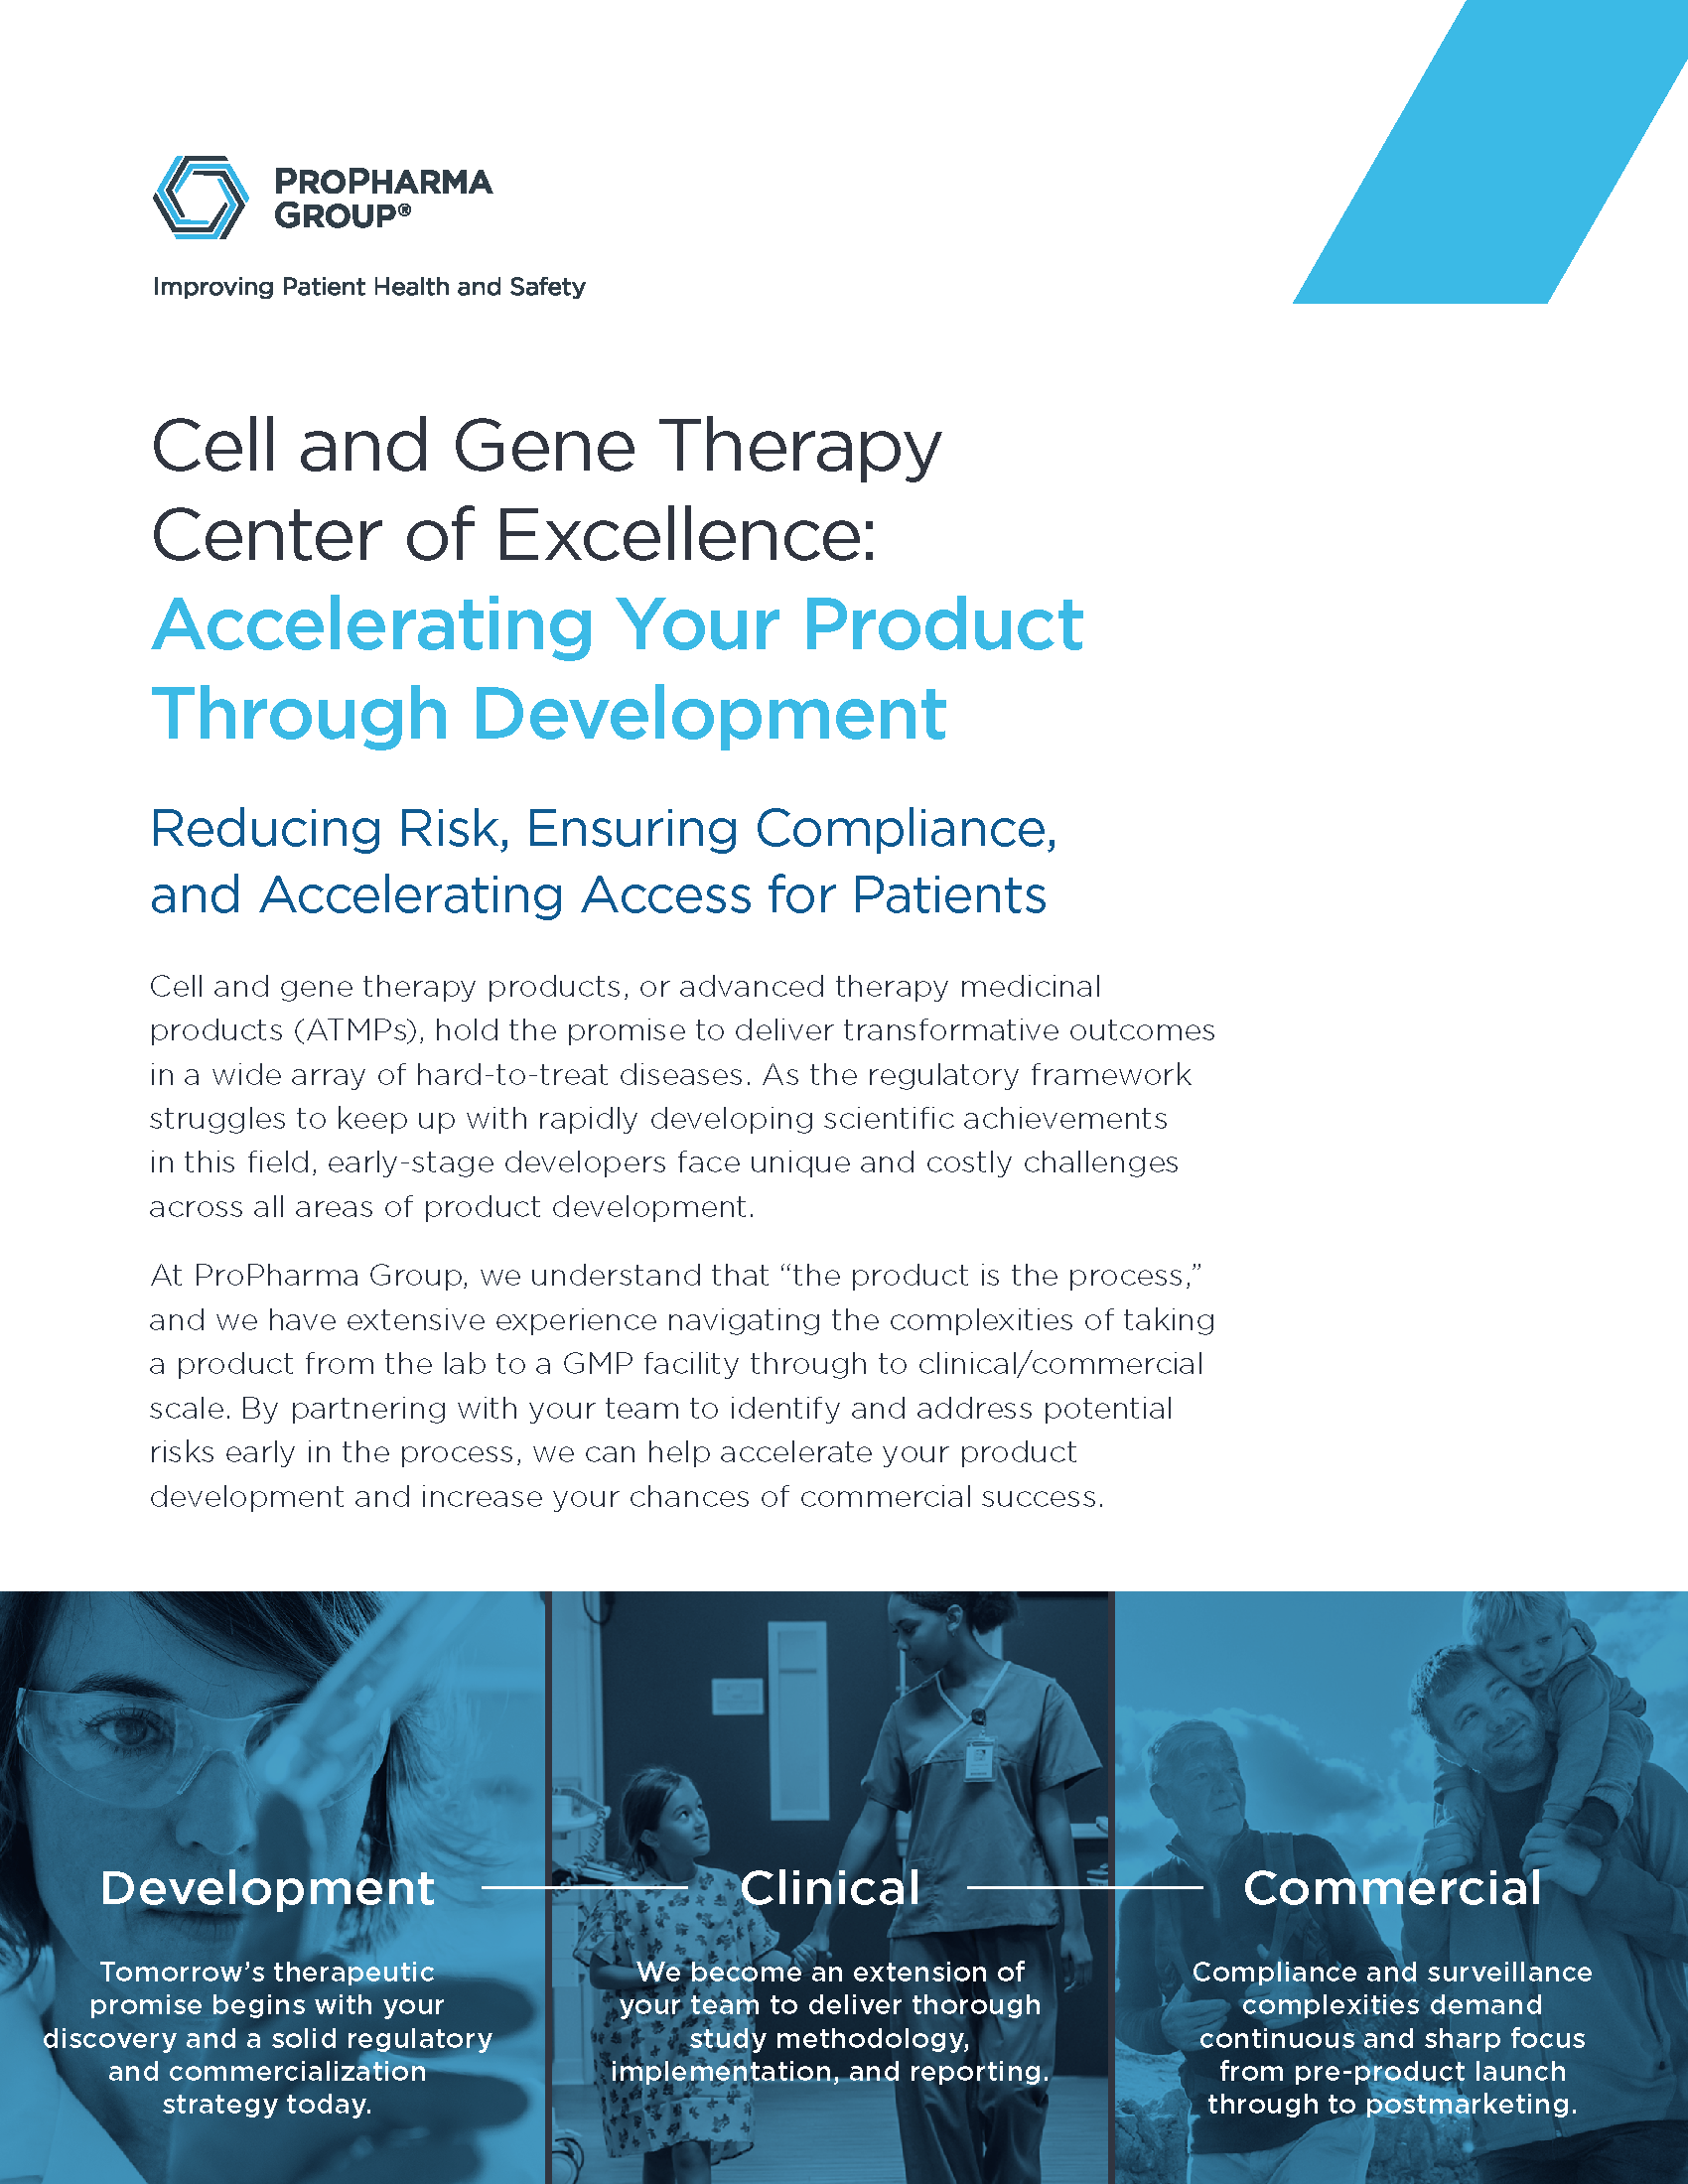 Cell and Gene Therapy Center of Excellence